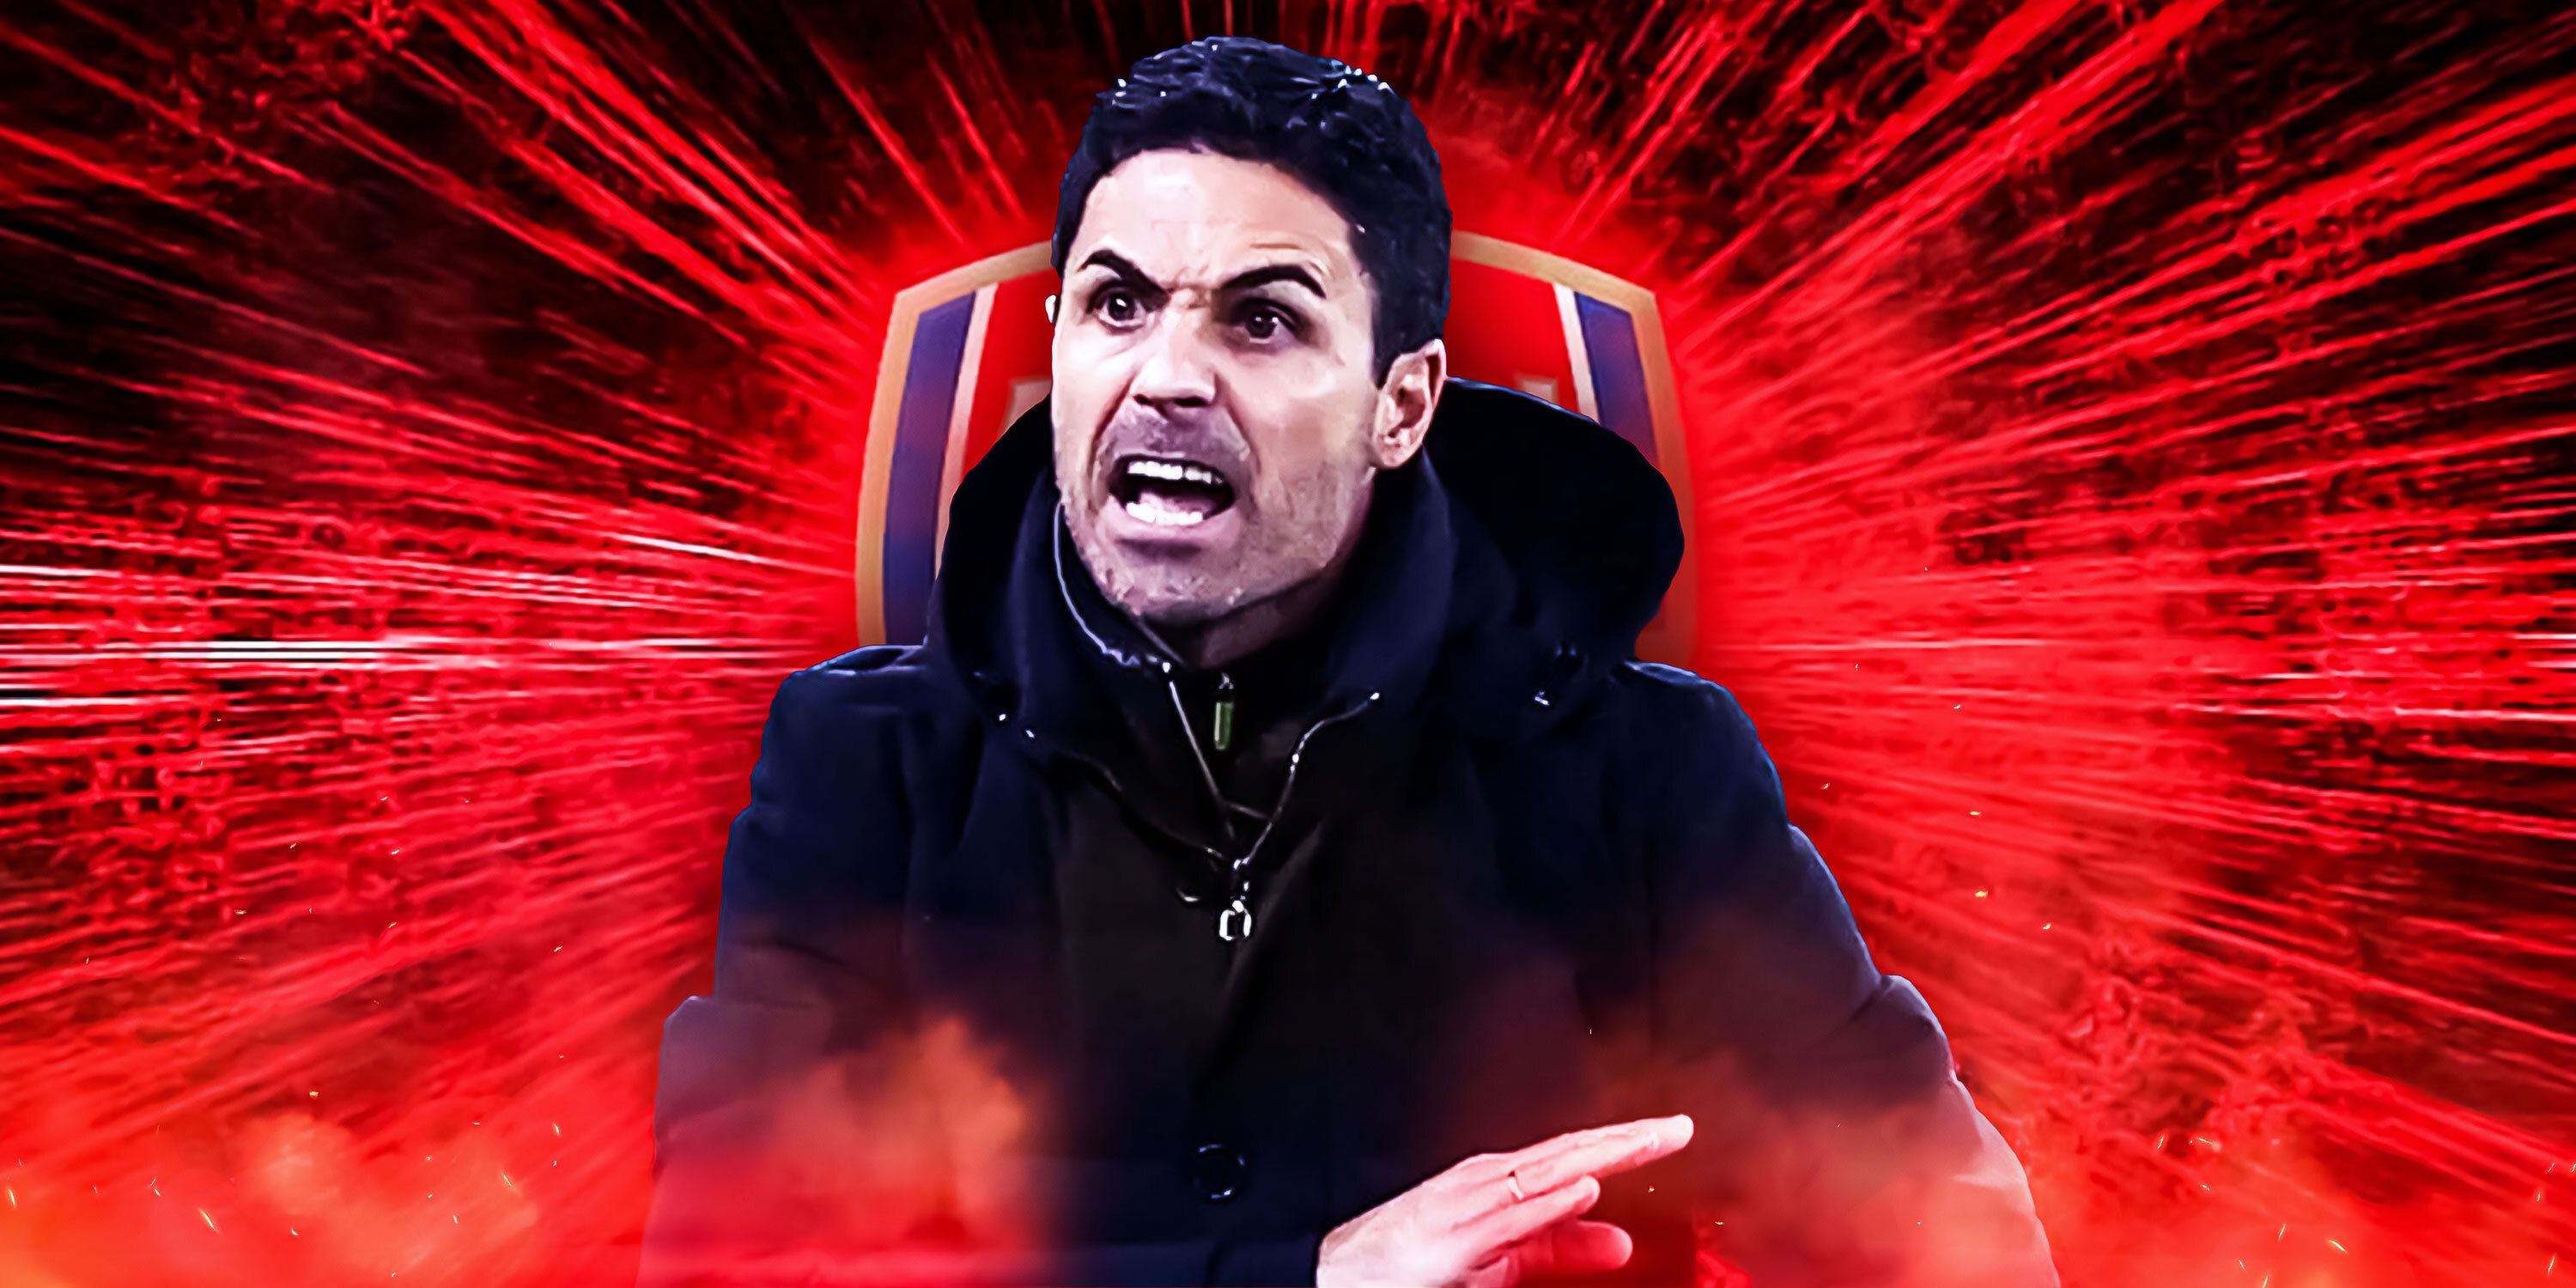 Mikel Arteta looking angry with Arsenal theme/logo